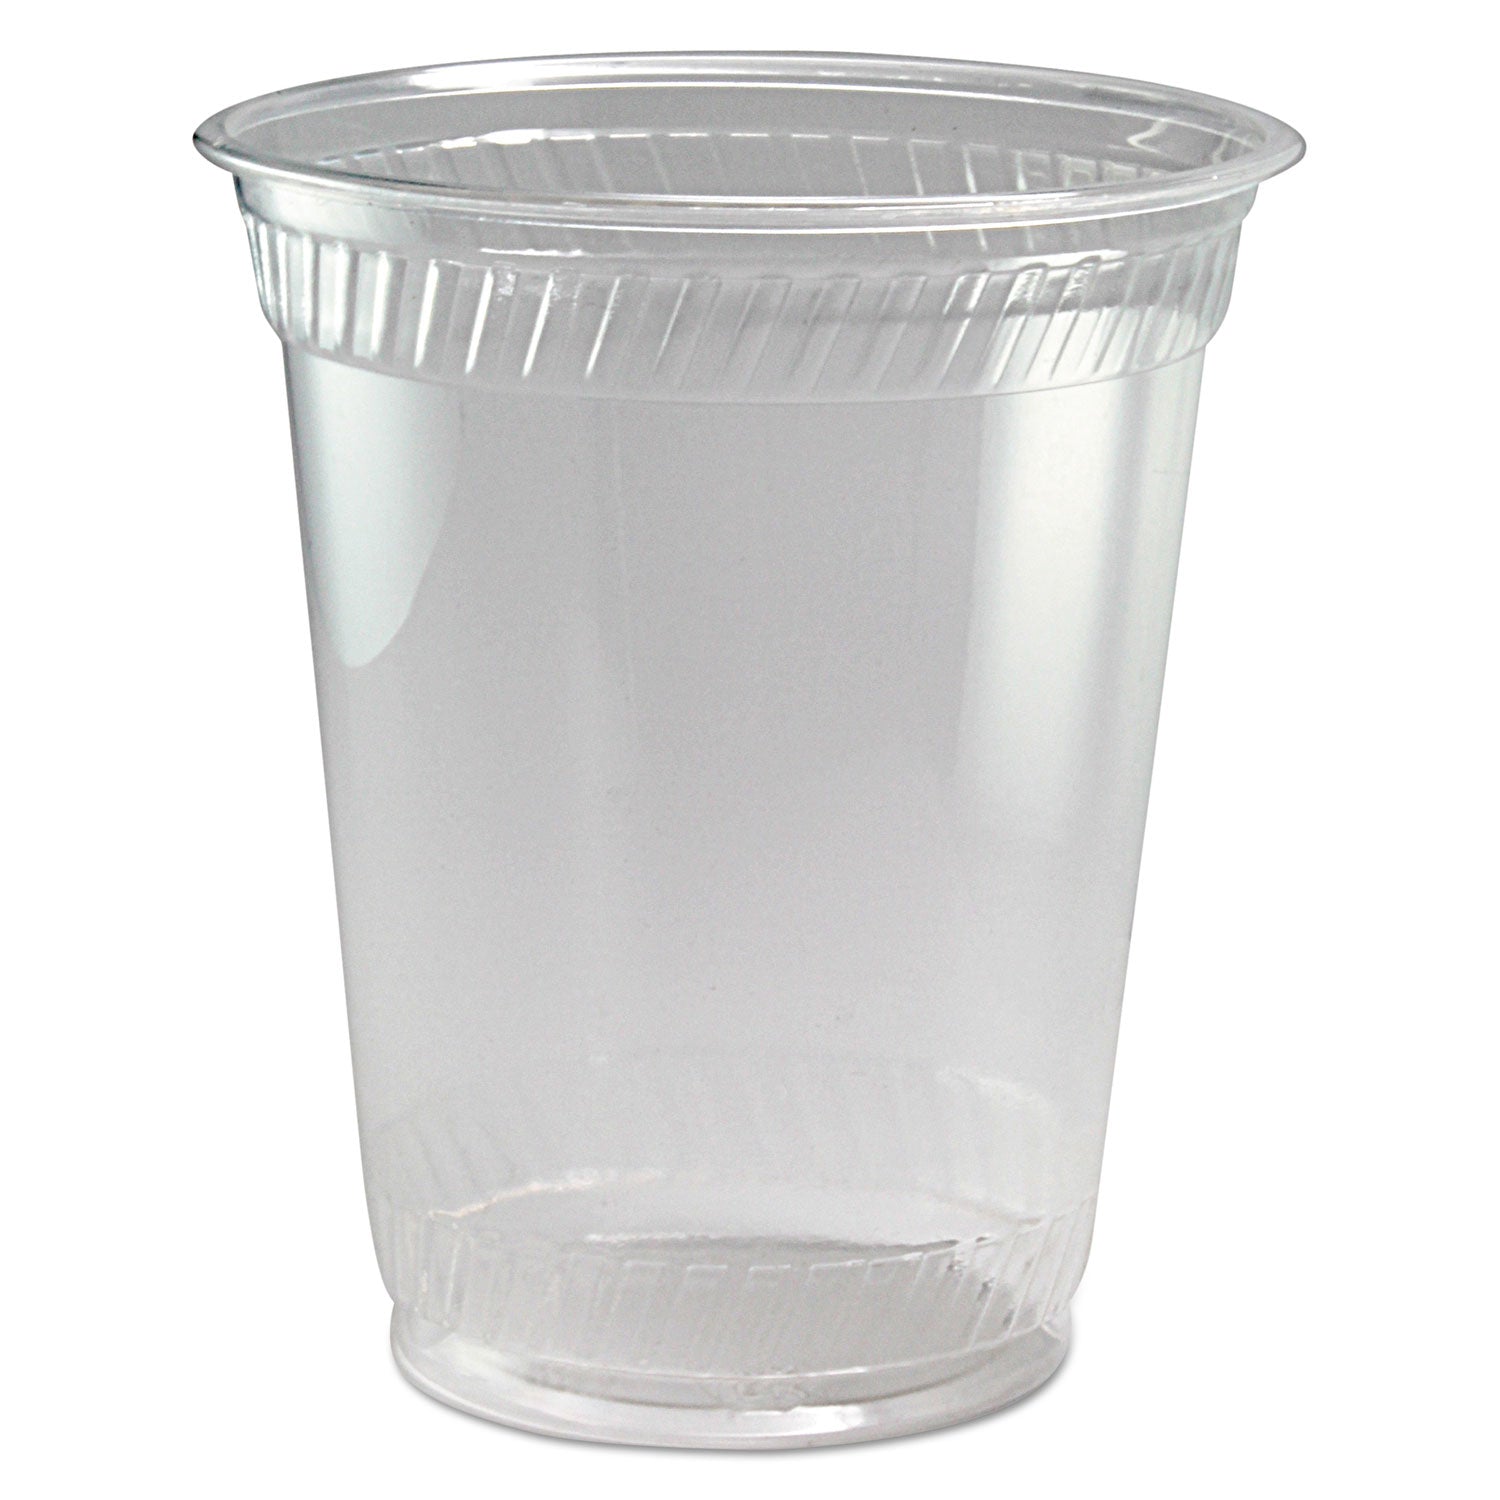 greenware-cold-drink-cups-12-oz-to-14-oz-clear-squat-1000-carton_fabgc12s - 1